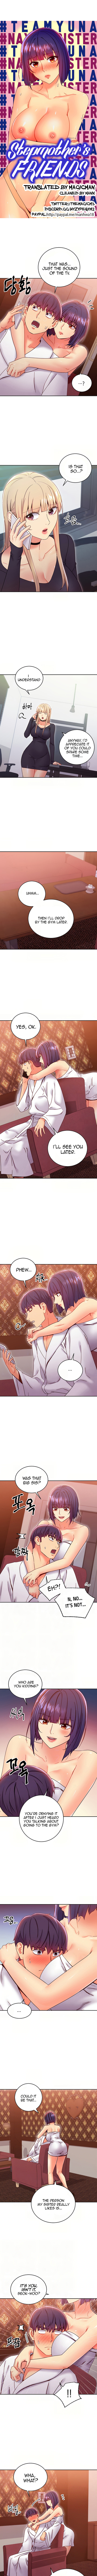 Panel Image 1 for chapter 78 of manhwa Stepmother